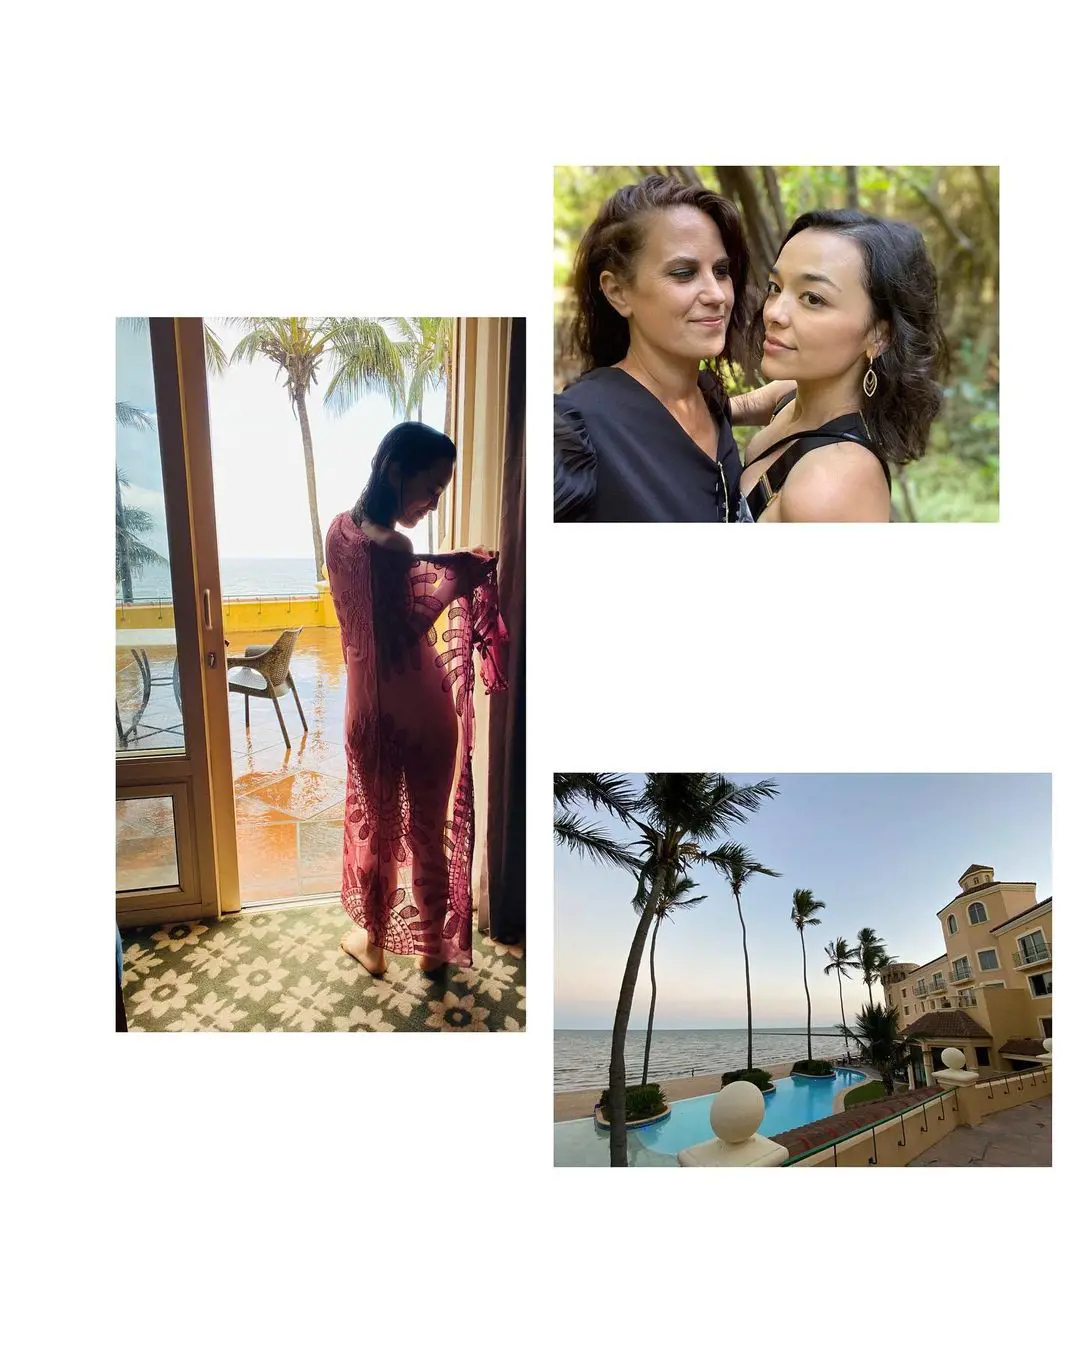 Francis shared a collage of her travel to Mozambique featuring Jeanne-Mare